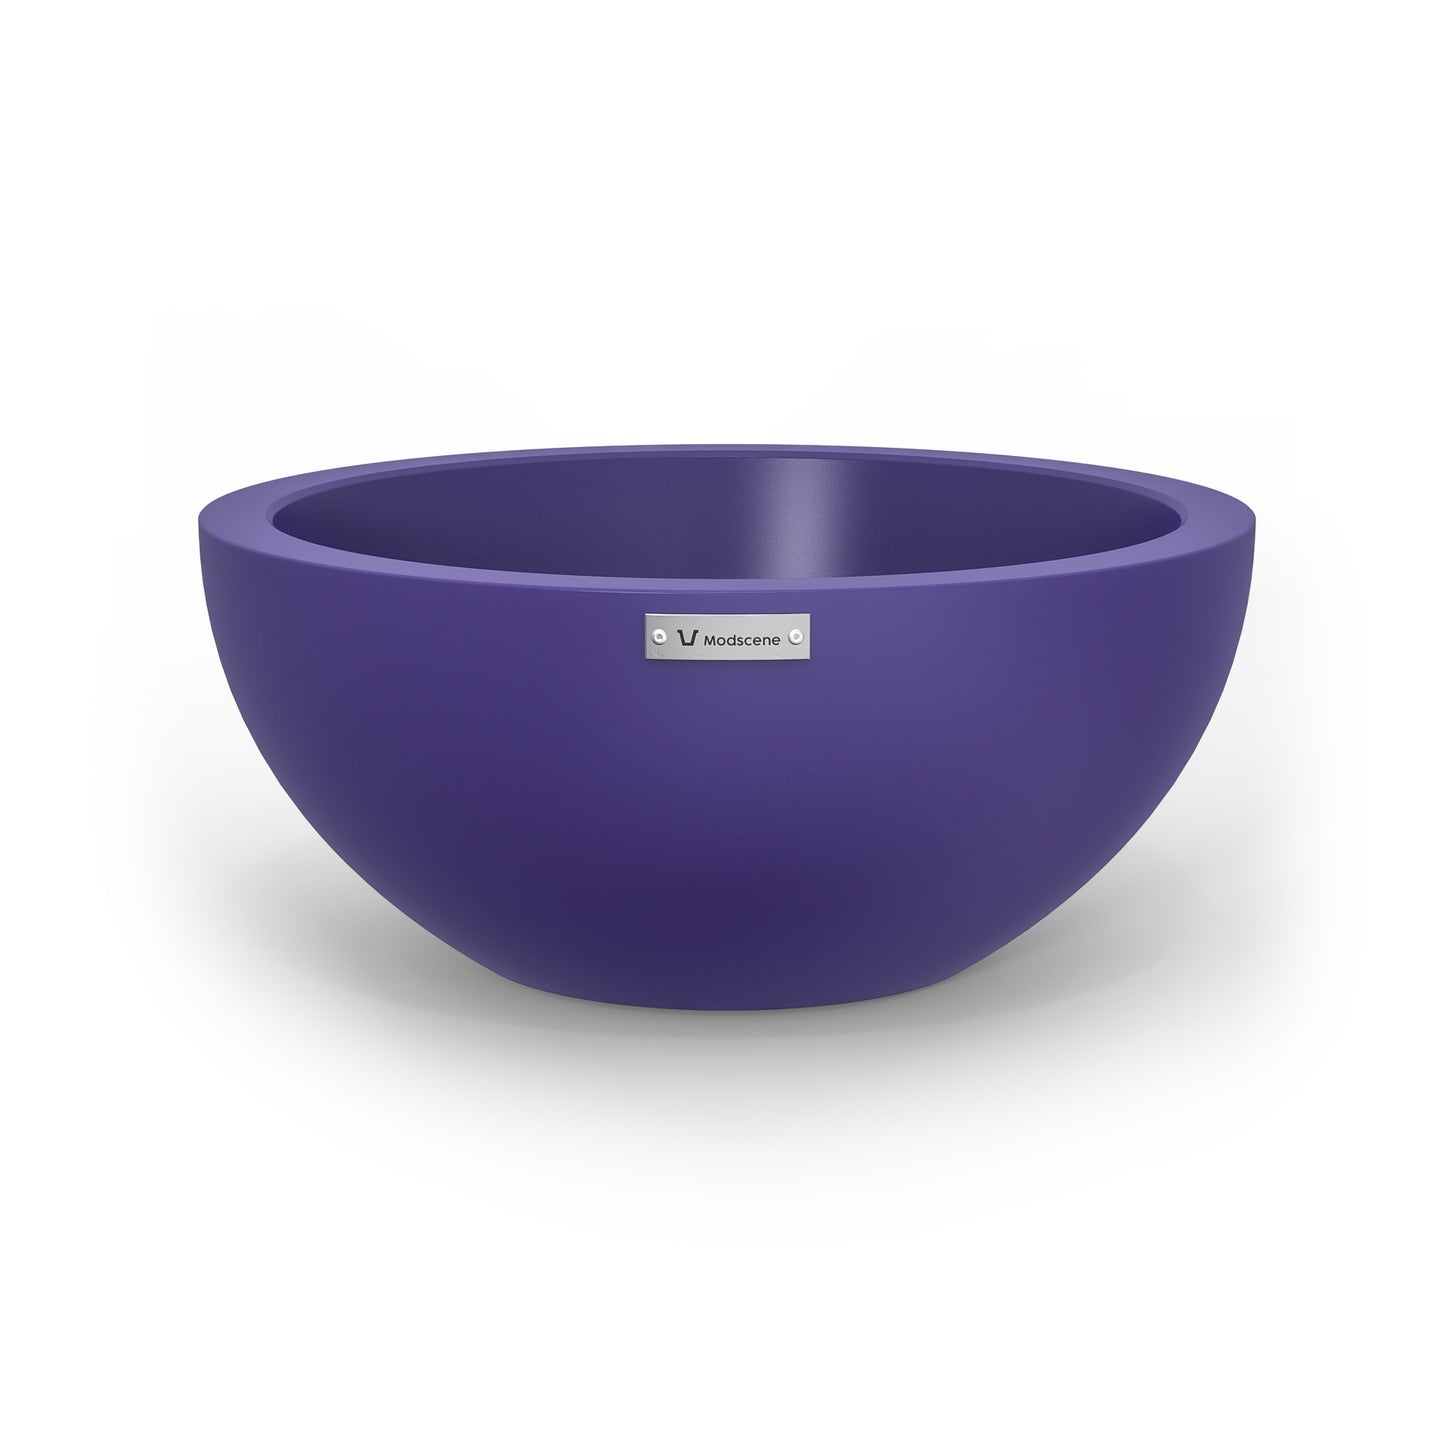 A small planter bowl in purple made by Modscene.